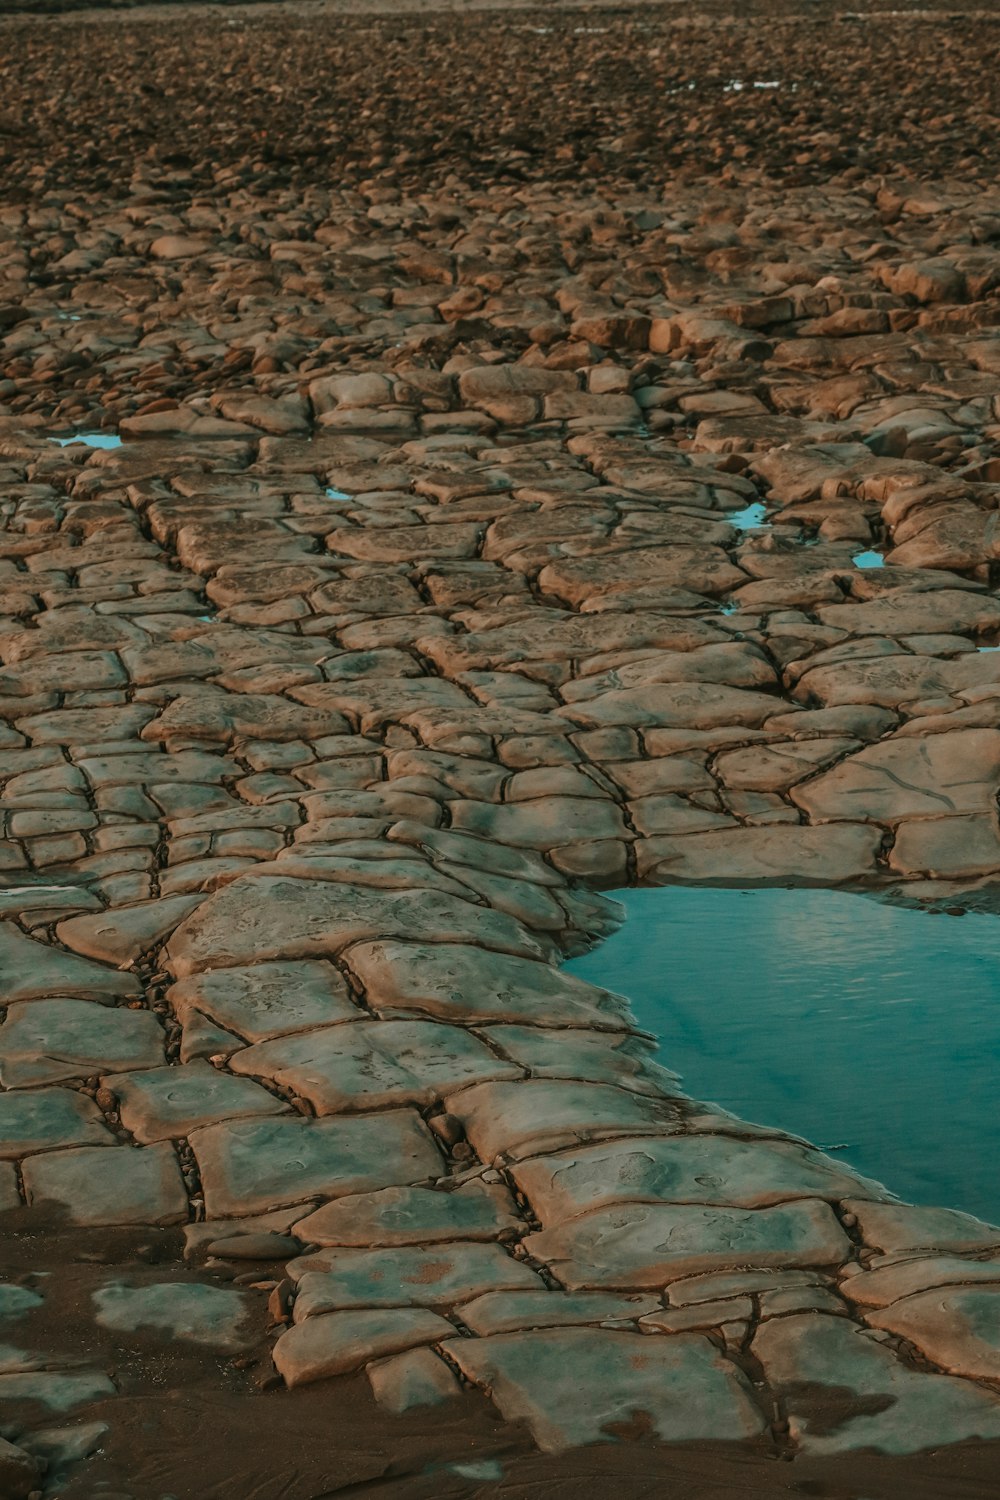 a large puddle of water surrounded by rocks